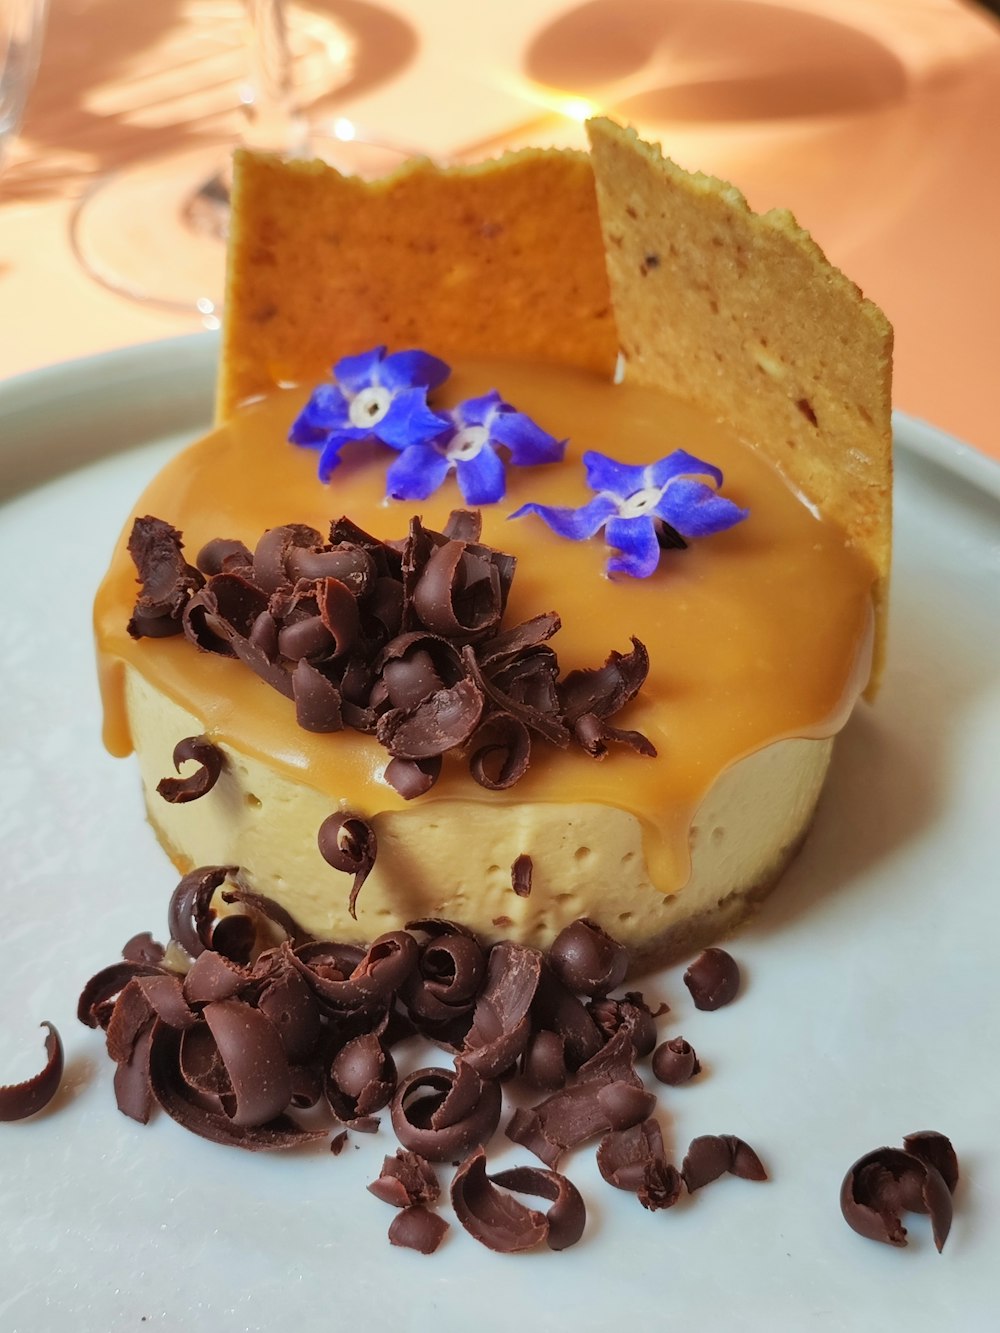 a piece of cheesecake with chocolate chips and blue flowers